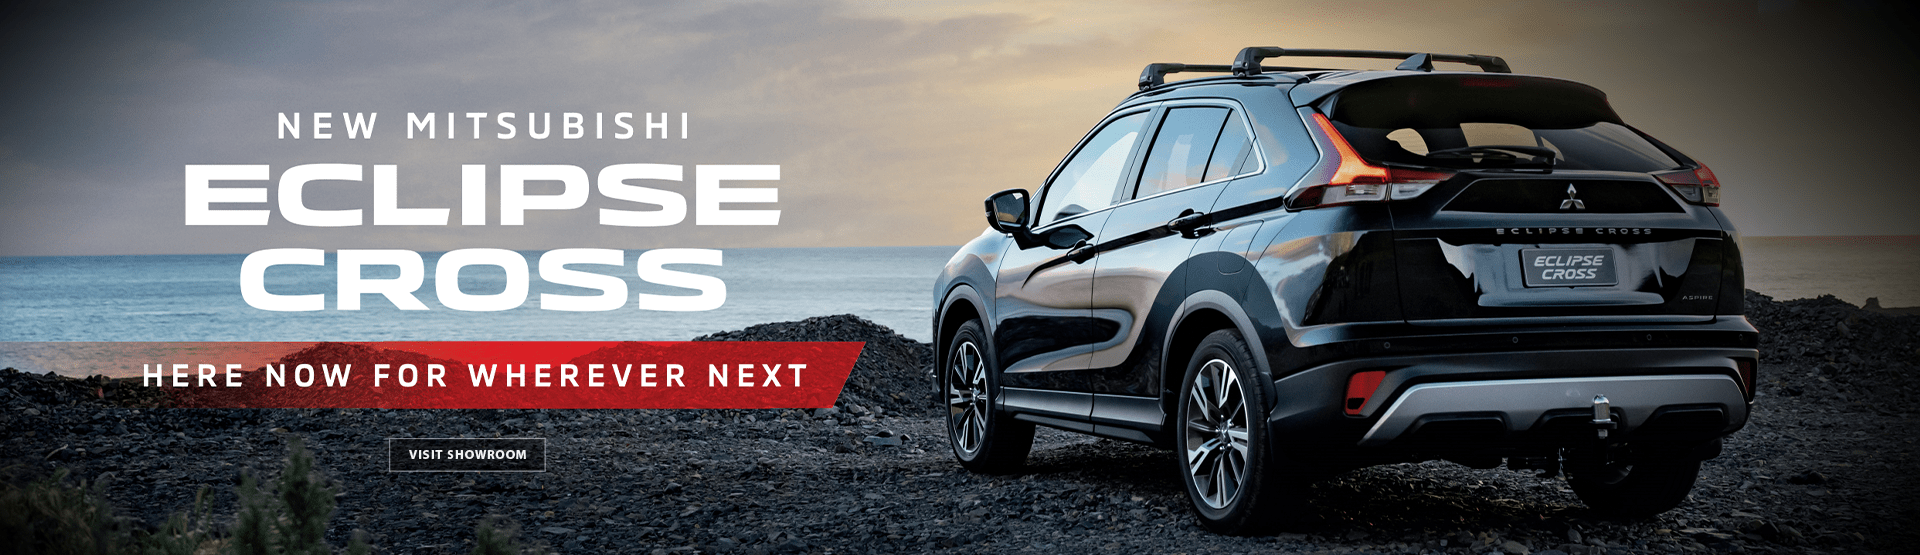 New Mitsubishi Eclipse Cross - Here now for wherever next